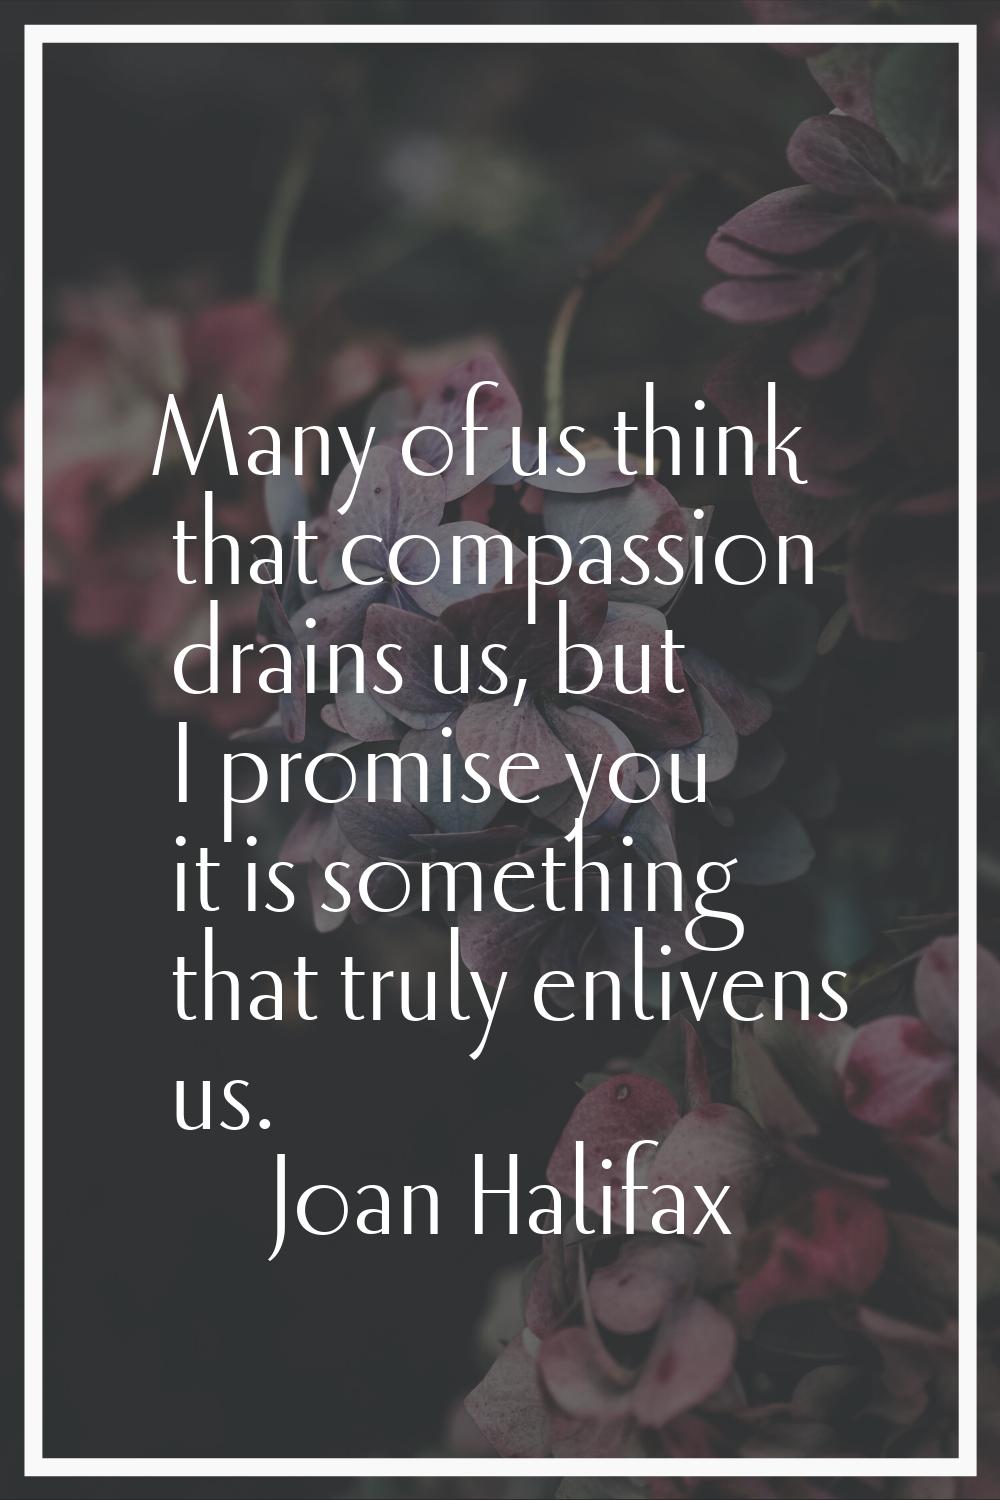 Many of us think that compassion drains us, but I promise you it is something that truly enlivens u